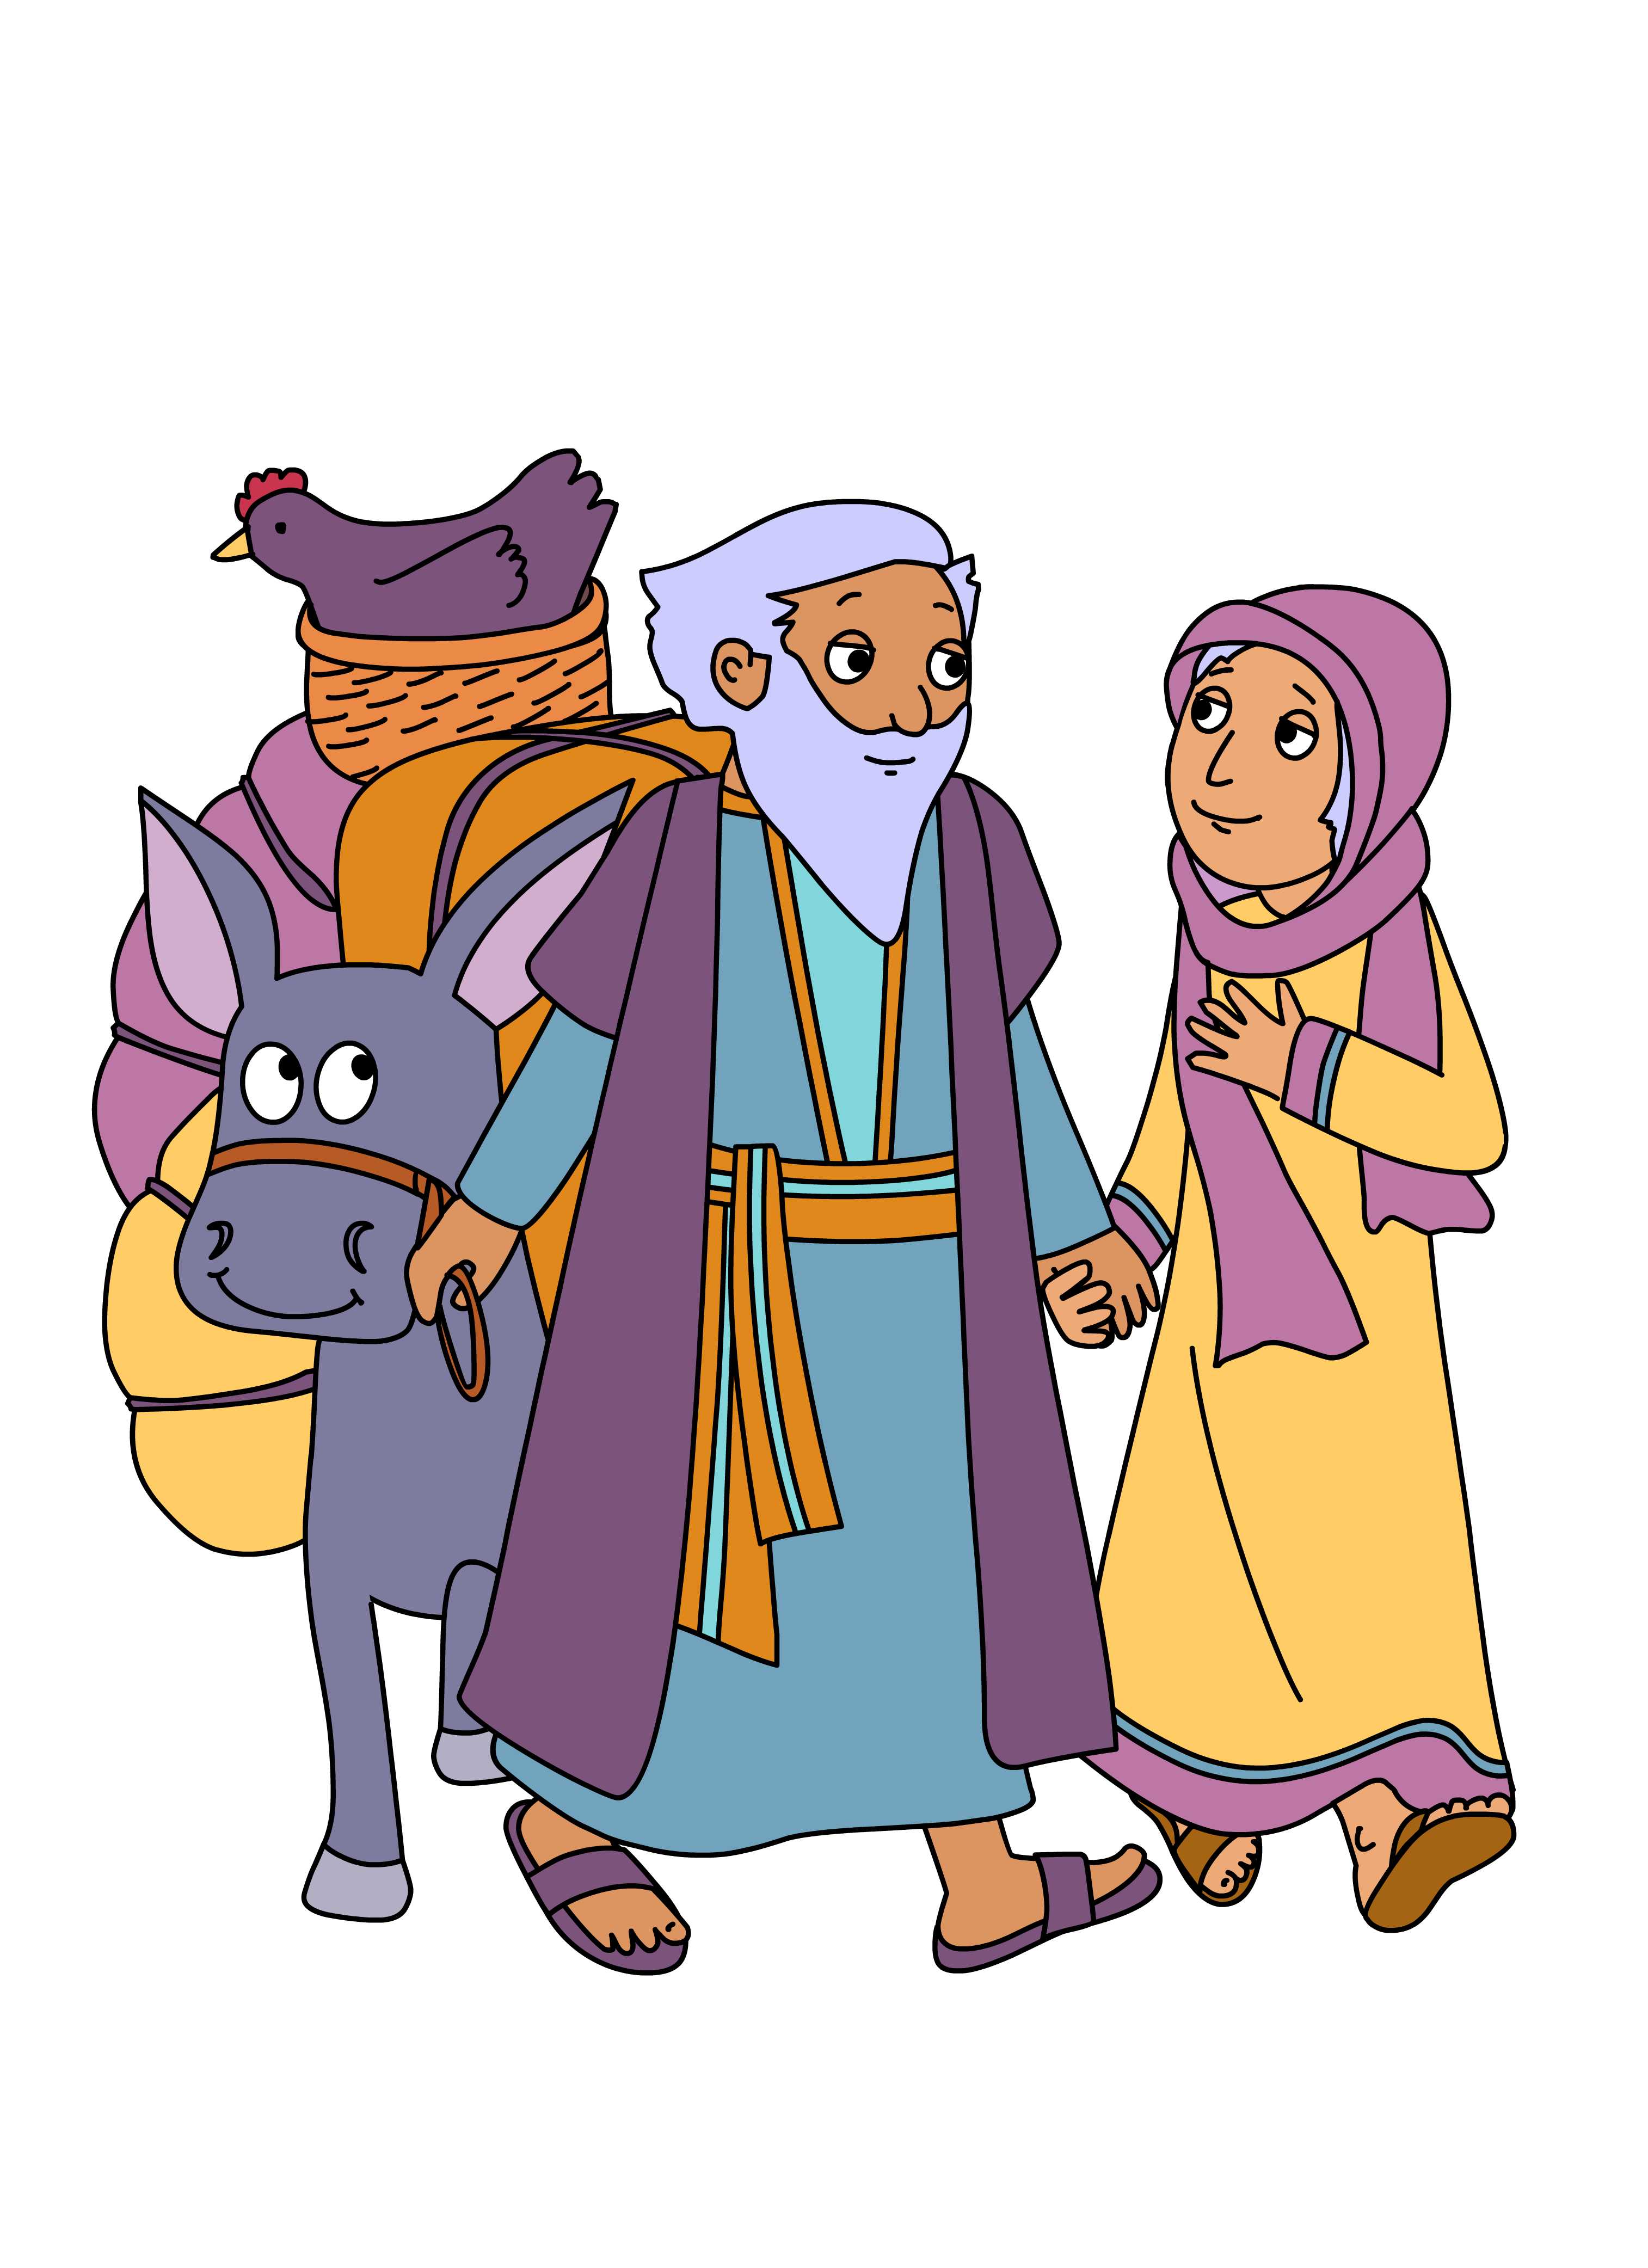 Home   Bible Stories   Activities   Abraham And Sarah   A New Home